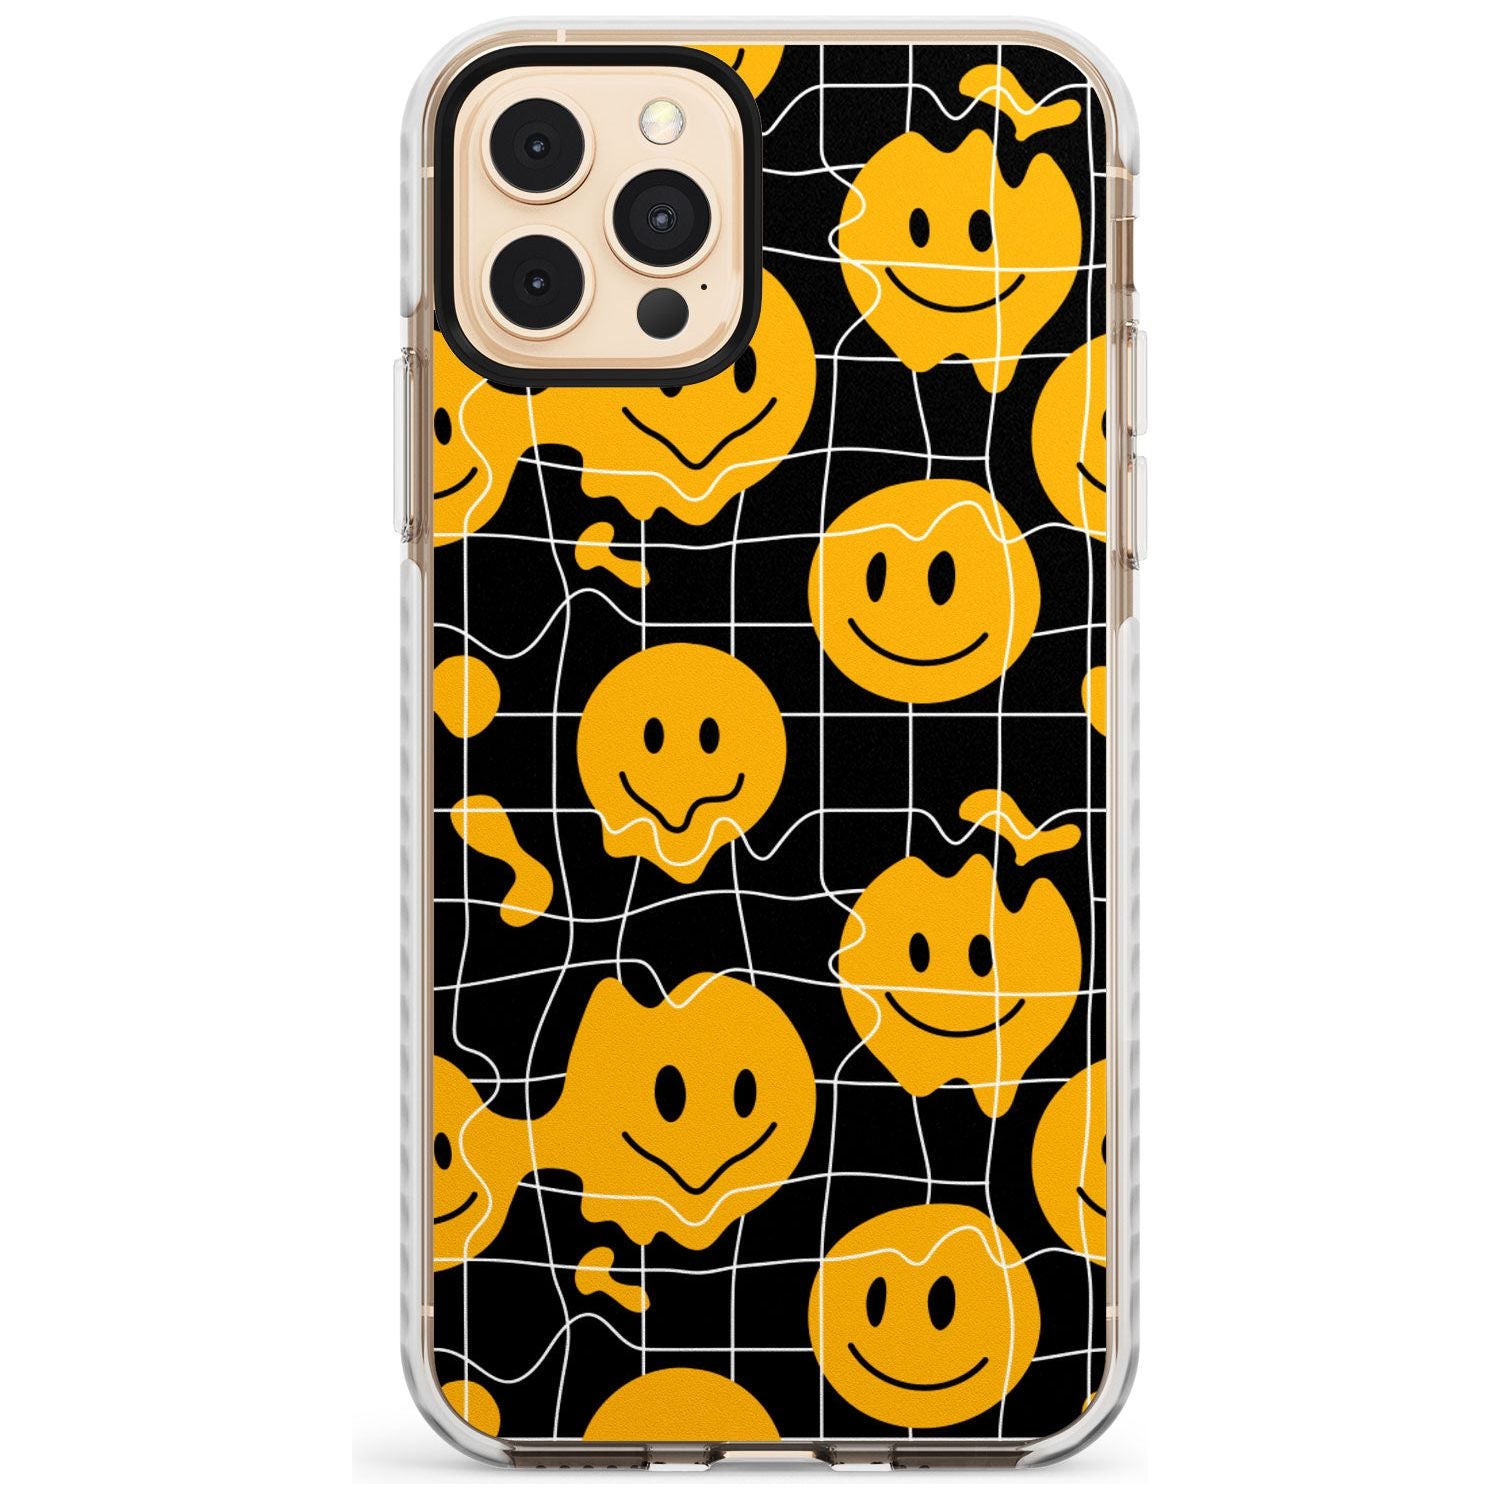 Acid Face Grid Pattern Impact Phone Case for iPhone 11 Pro Max